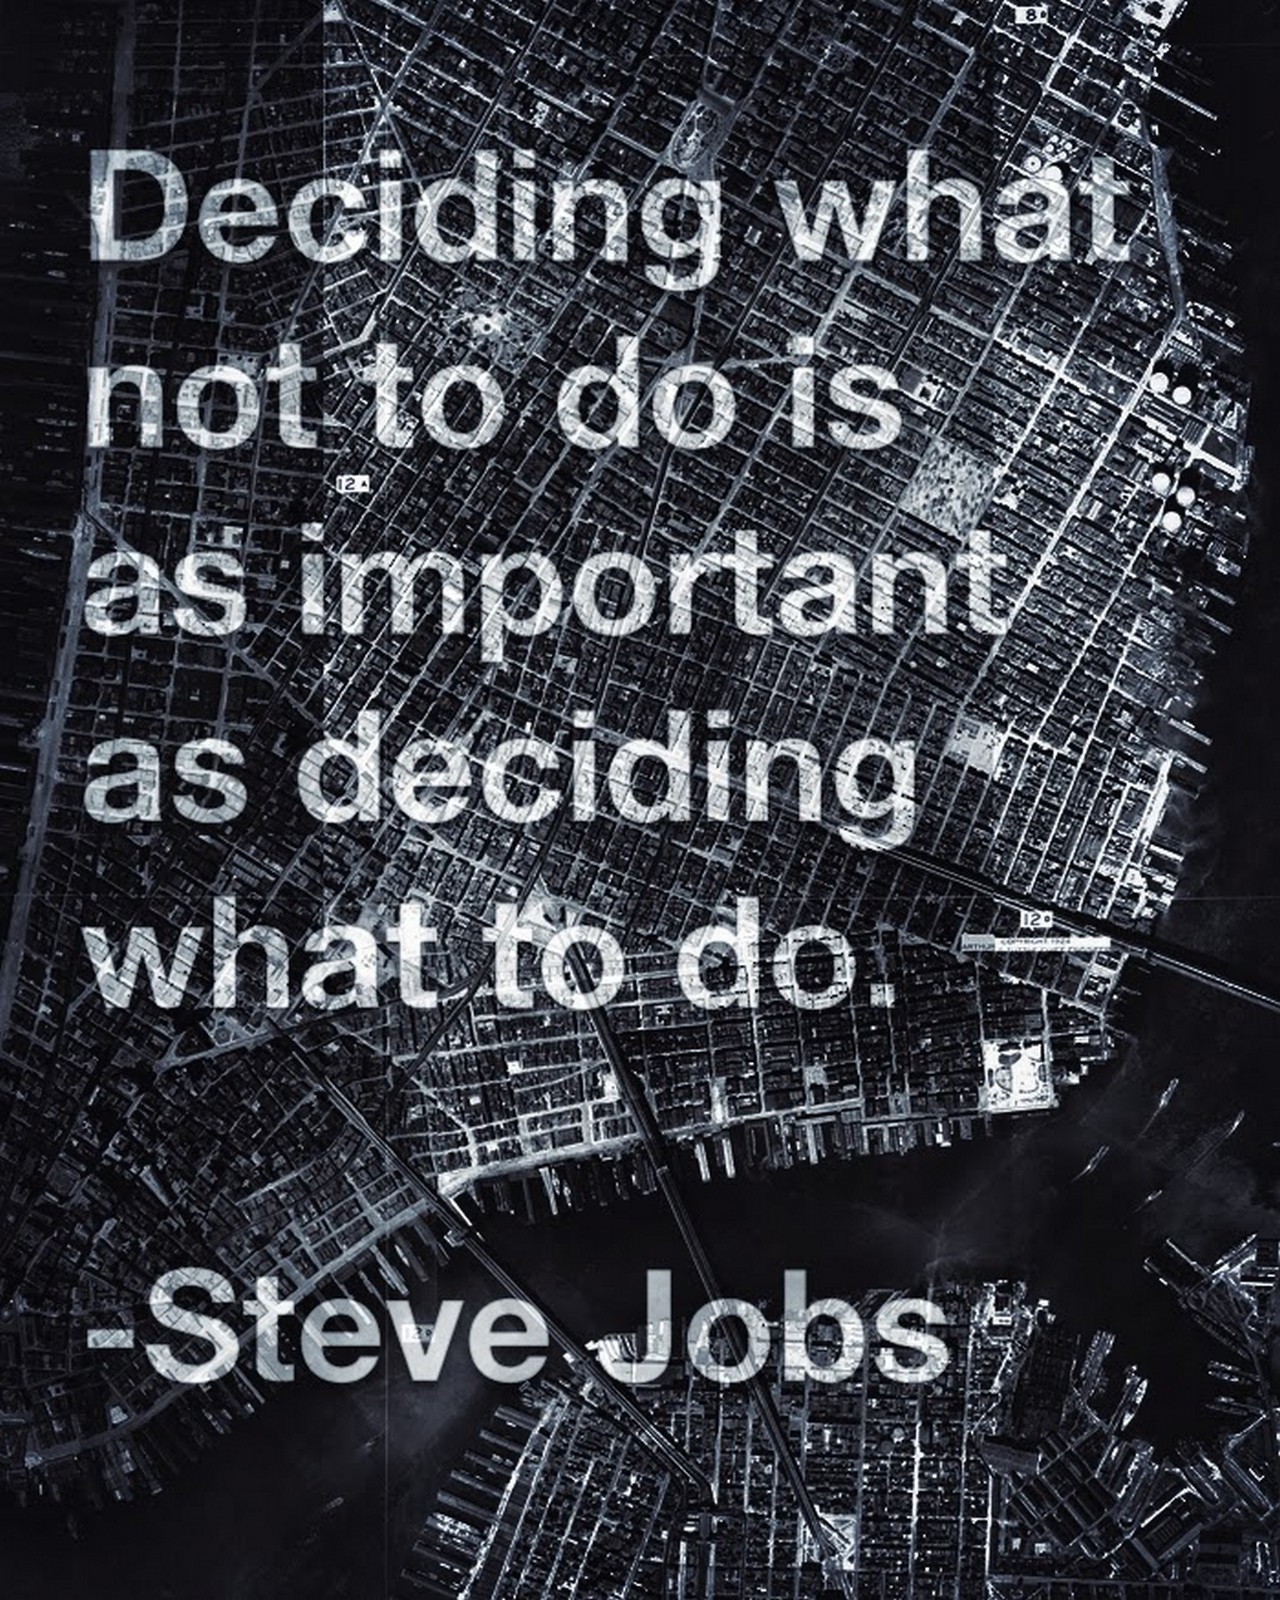 19 Best Steve Jobs Quotes - "Deciding what not to do is as important as deciding what to do."